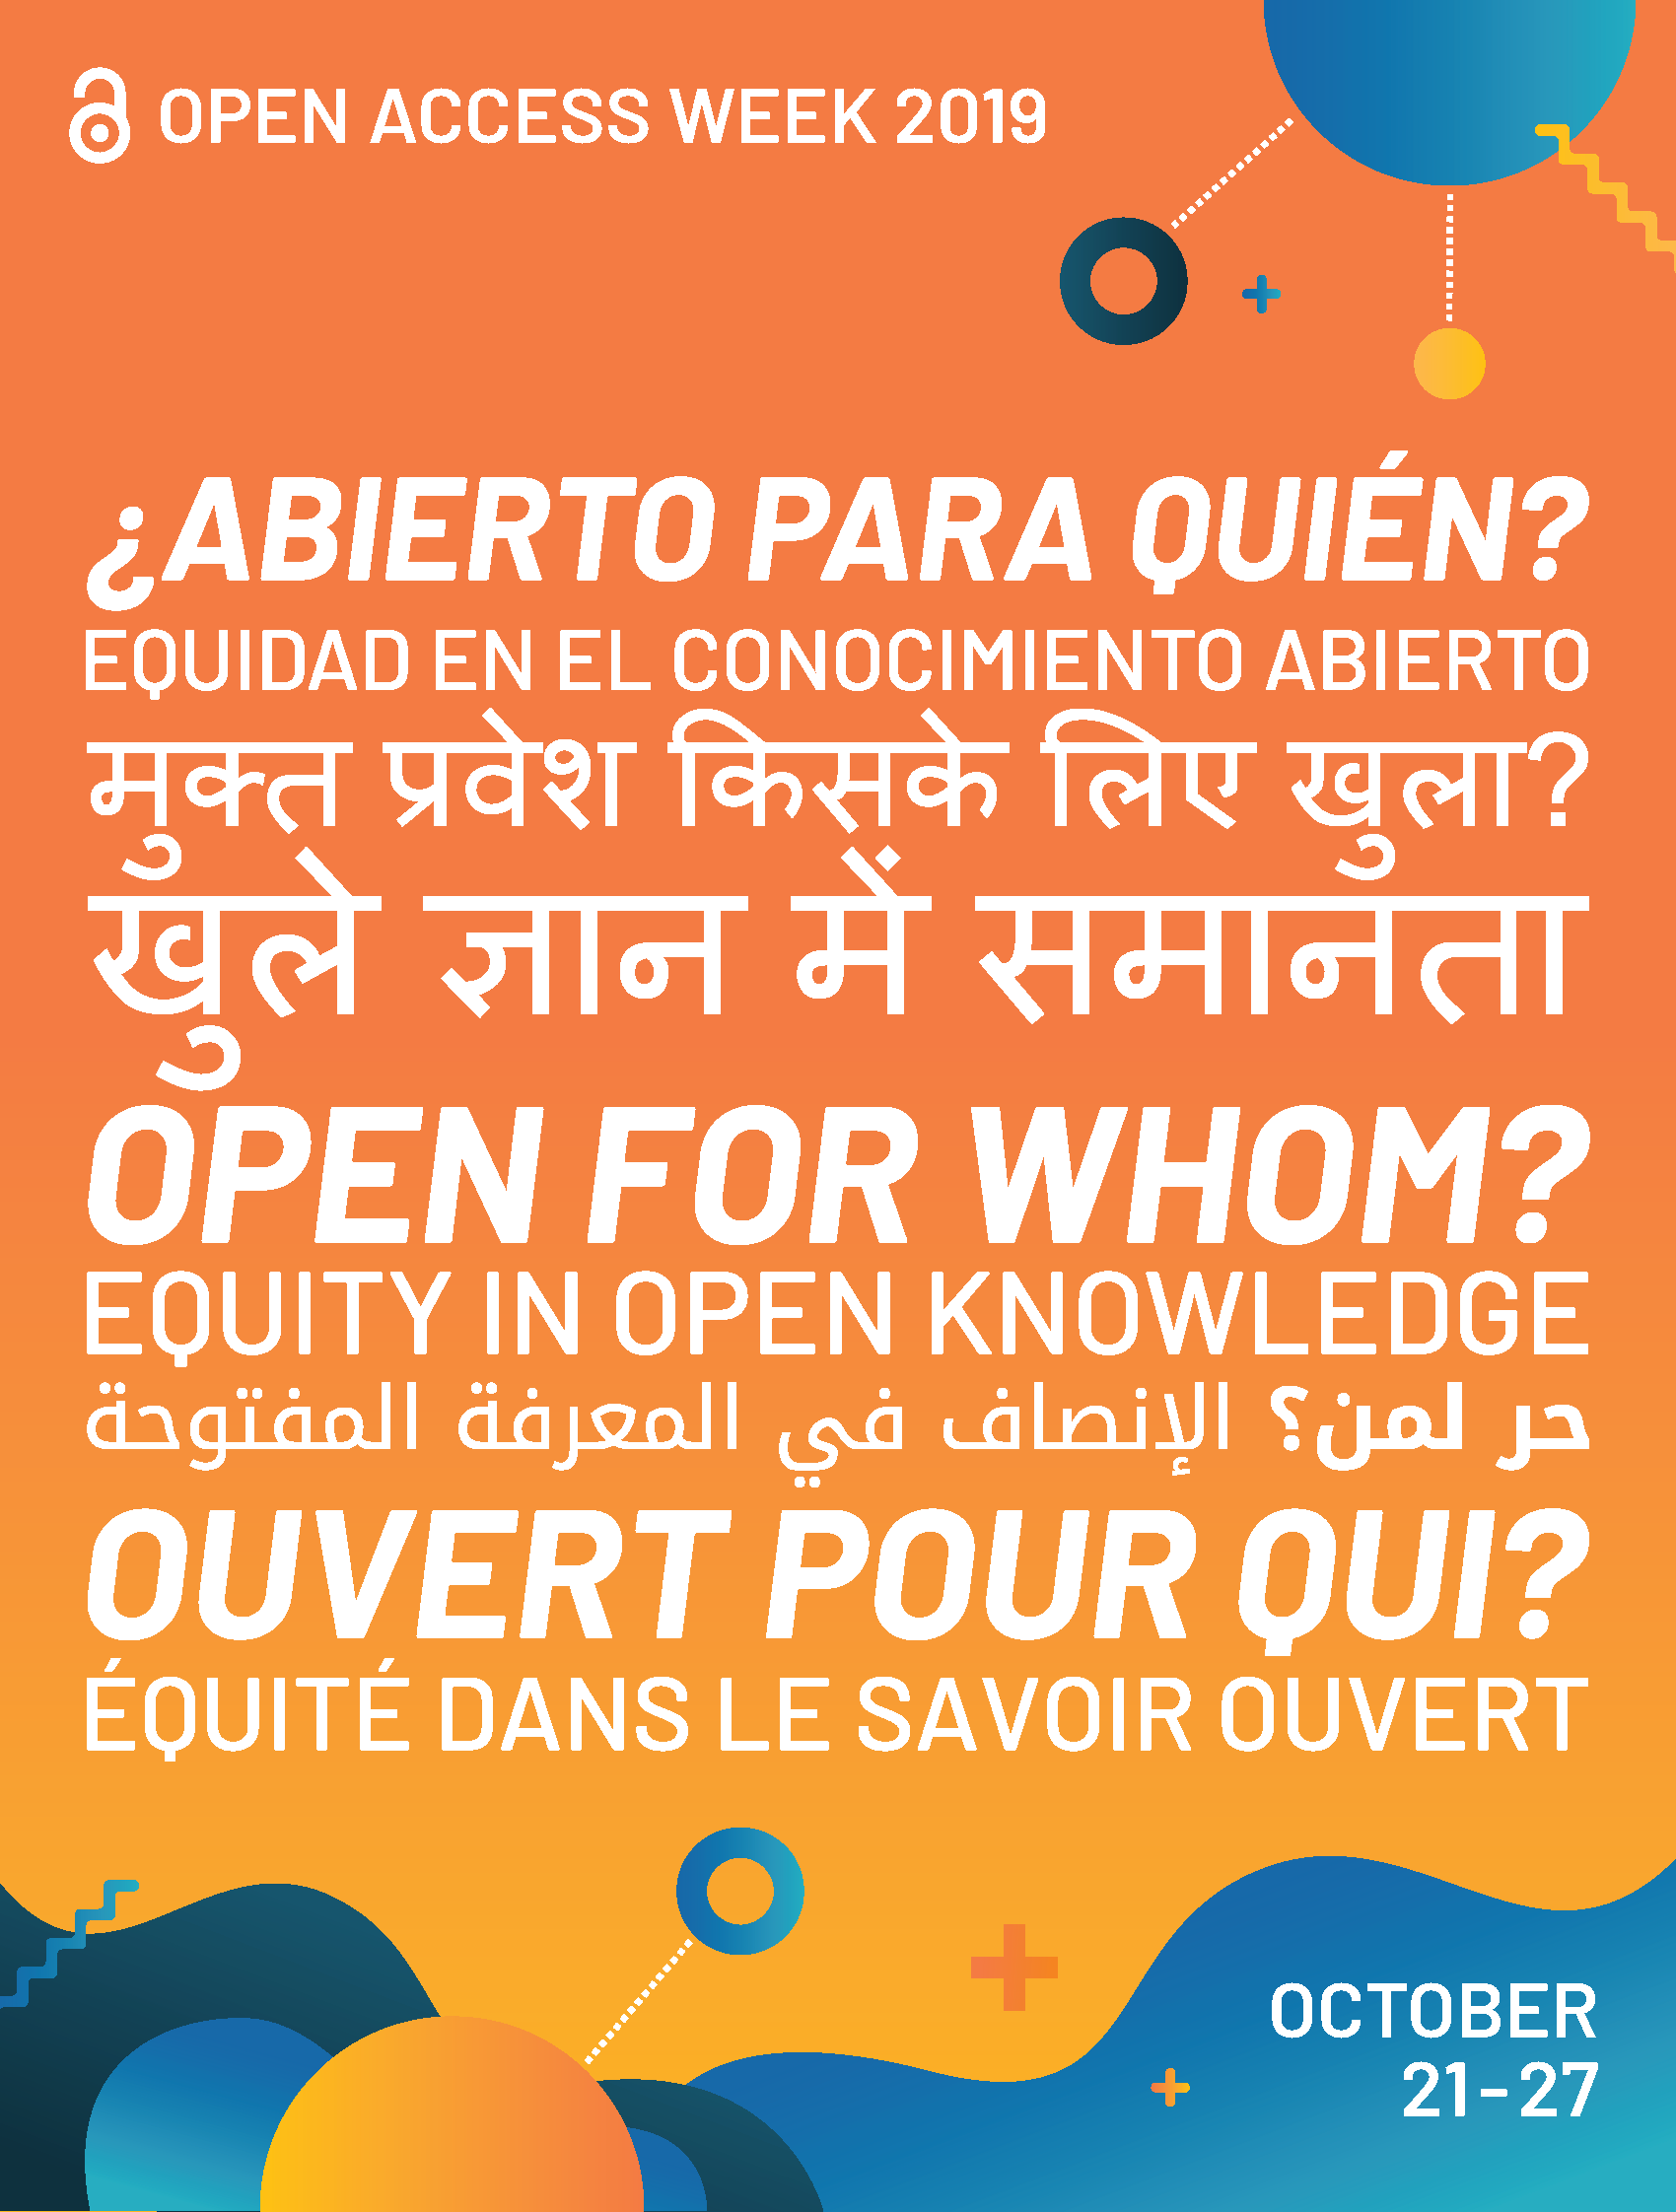 Open Access Week 2019 Poster Translated Into Various Languages